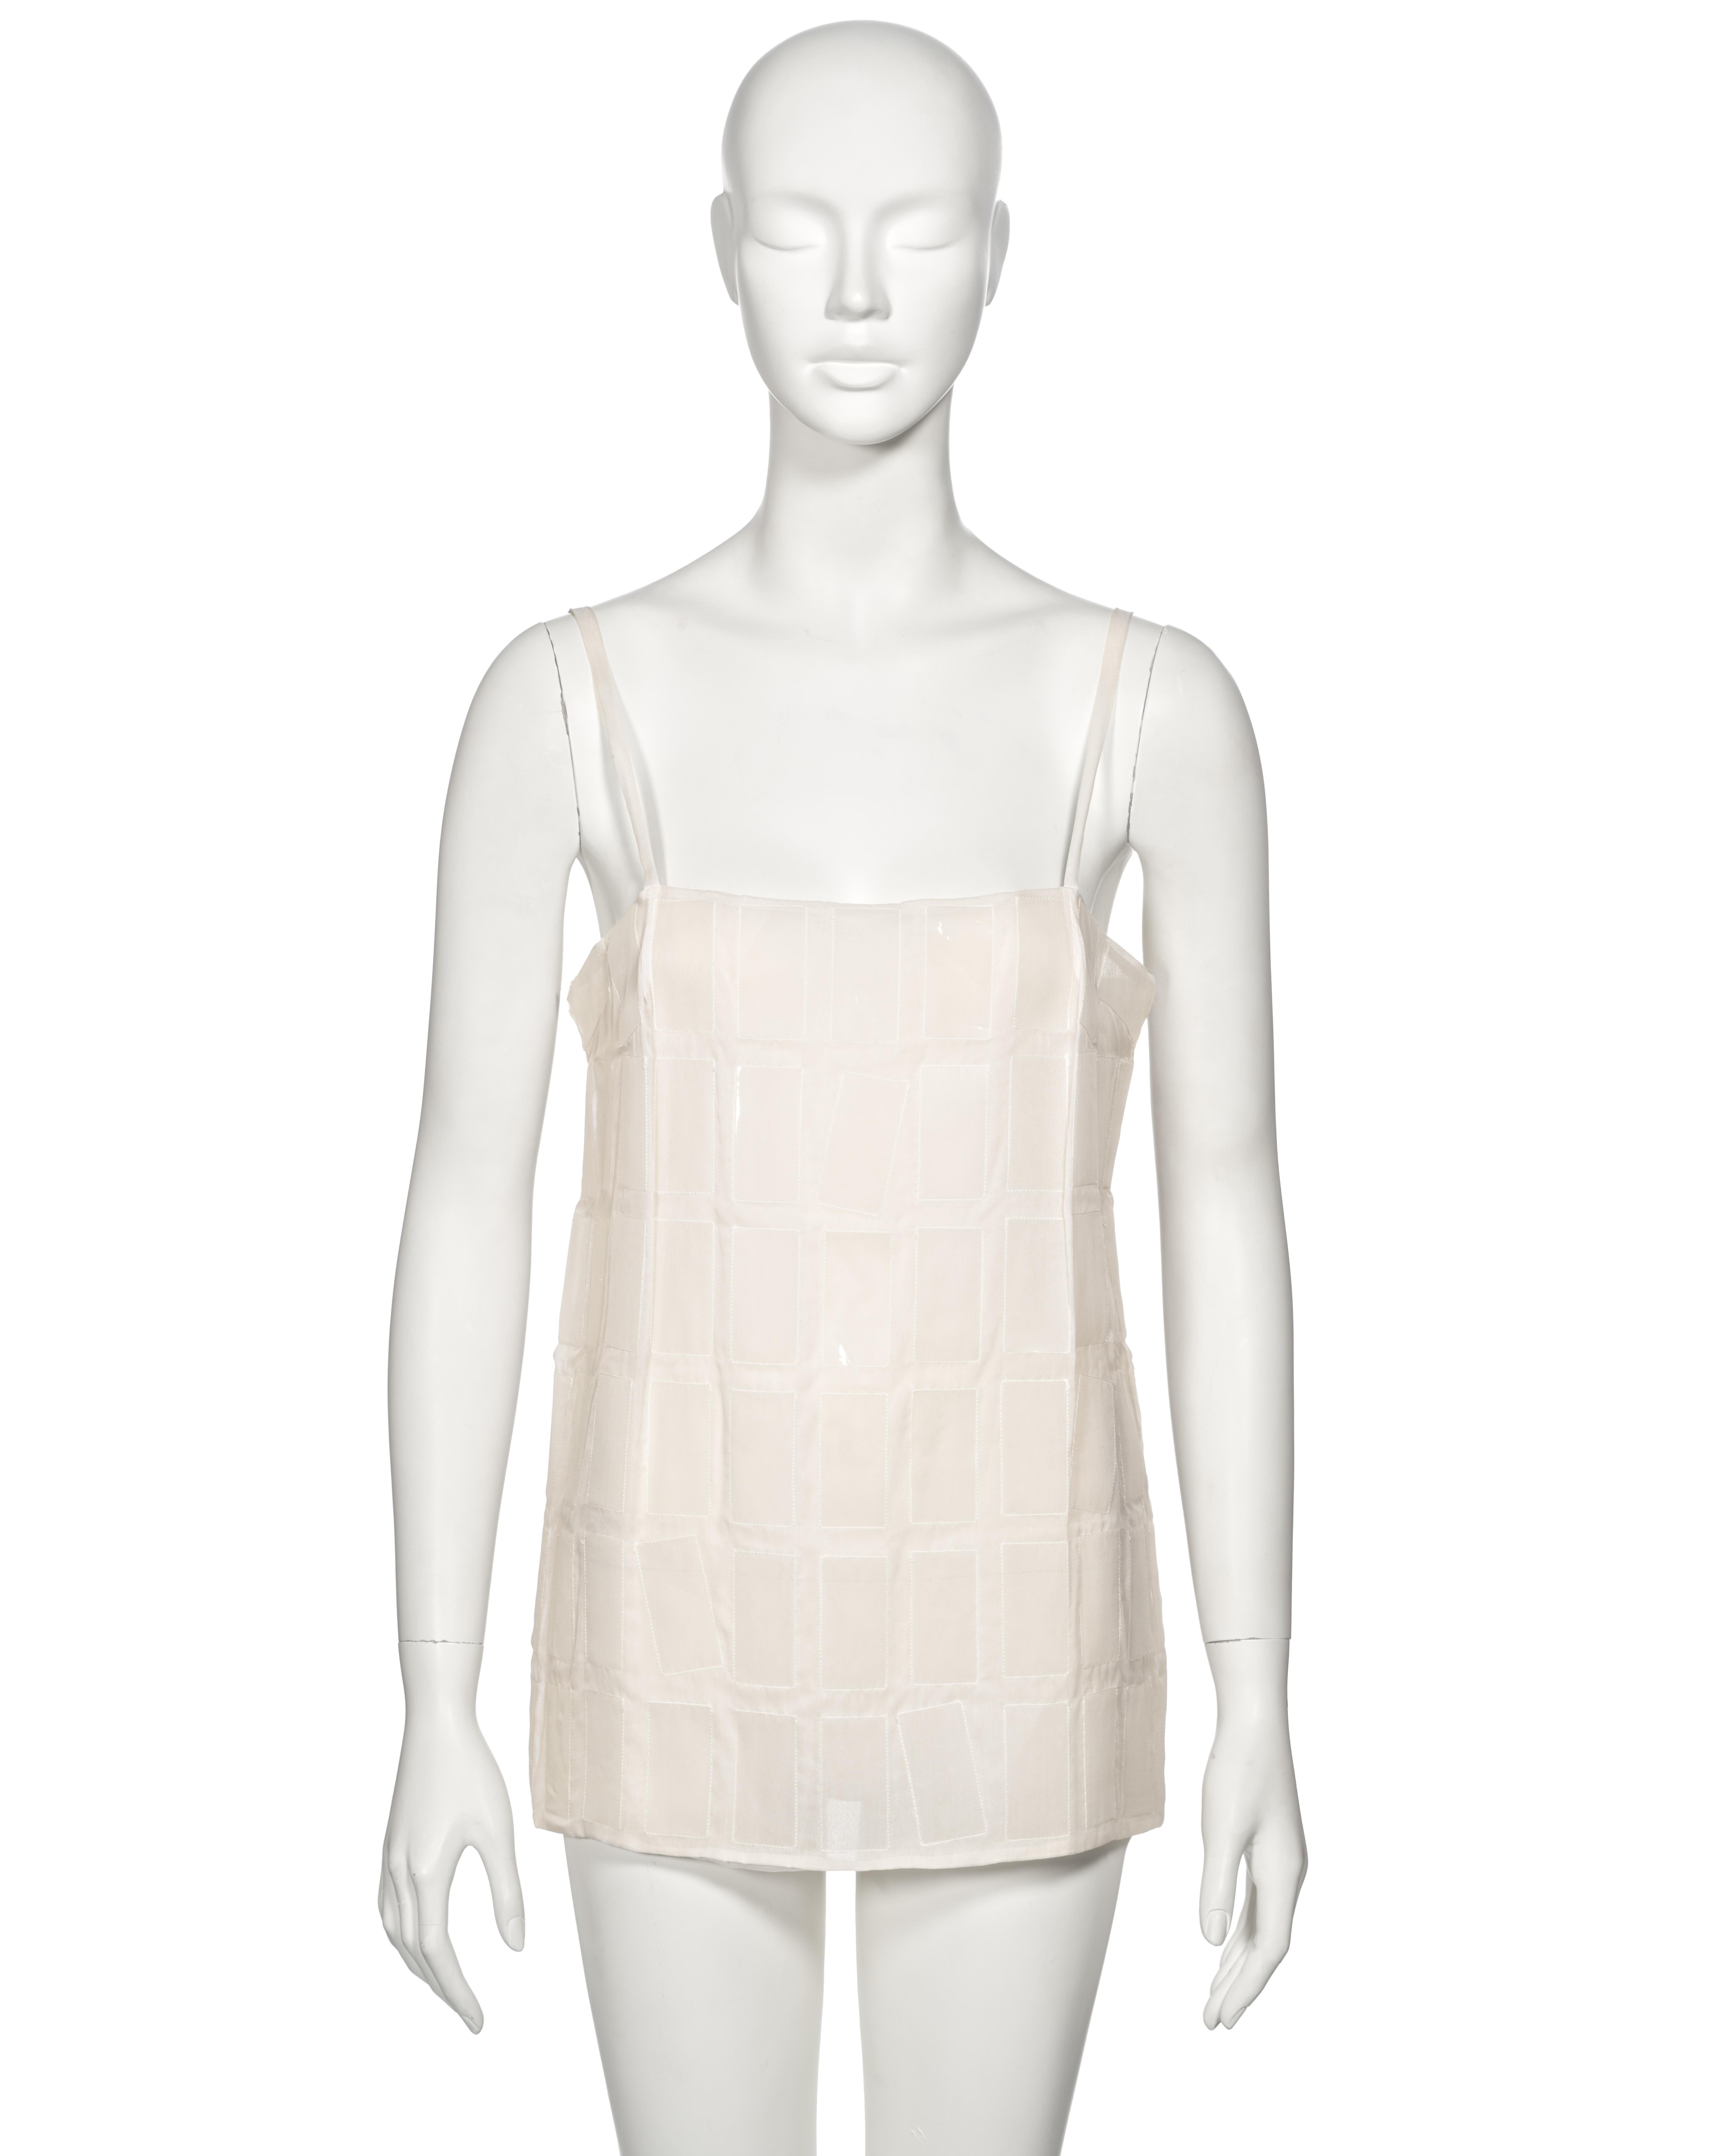 ▪ Archival Prada Camisole Top
▪ Creative Director: Miuccia Prada
▪ Fall-Winter 1998
▪ Sold by One of a Kind Archive
▪ Museum Grade 
▪ Constructed from white silk organza 
▪ Adorned with incased clear plastic sheets / tiles  
▪ Straight neckline  
▪